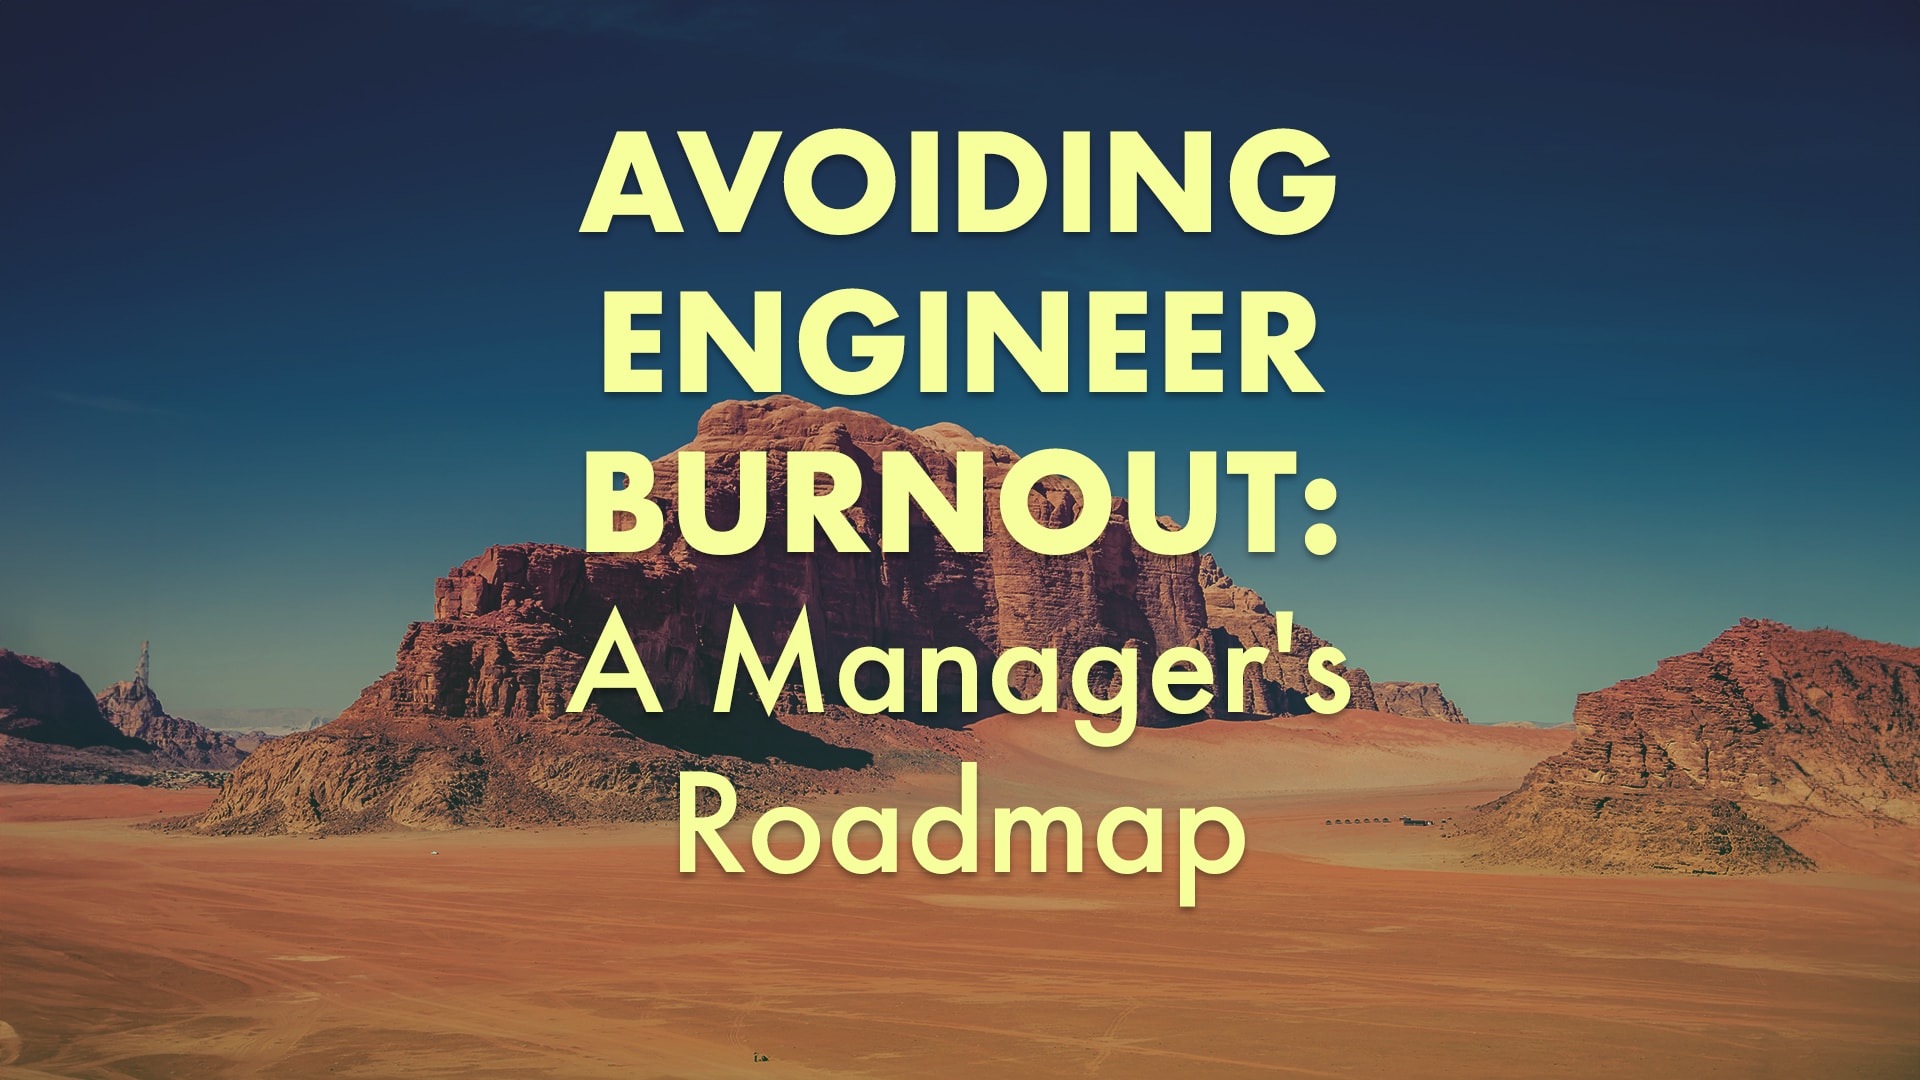 Desert landscape with the text, 'Avoiding Engineer Burnout: A Manager's Roadmap', over it.